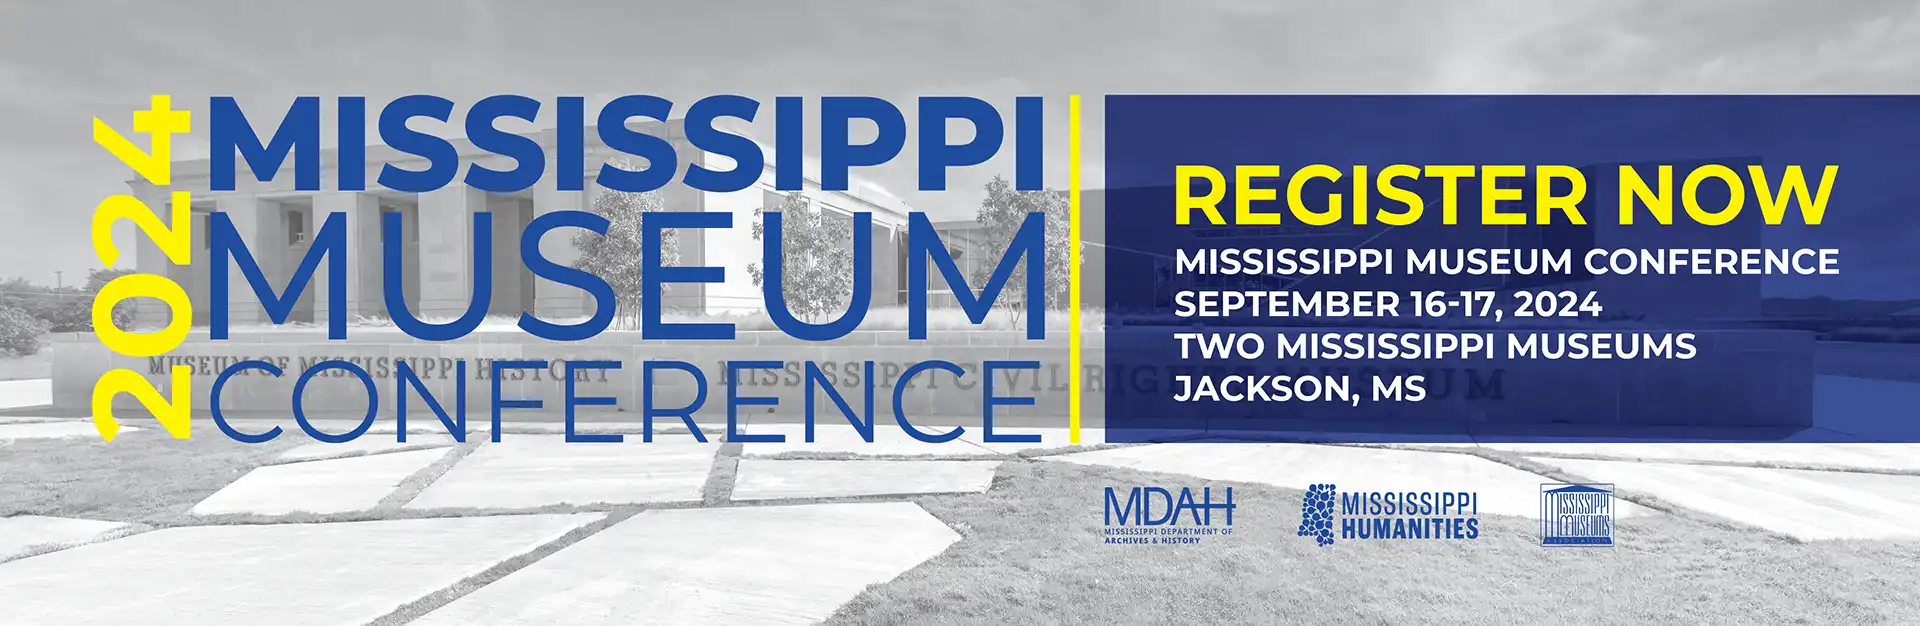 Mississippi Museum Conference 2024